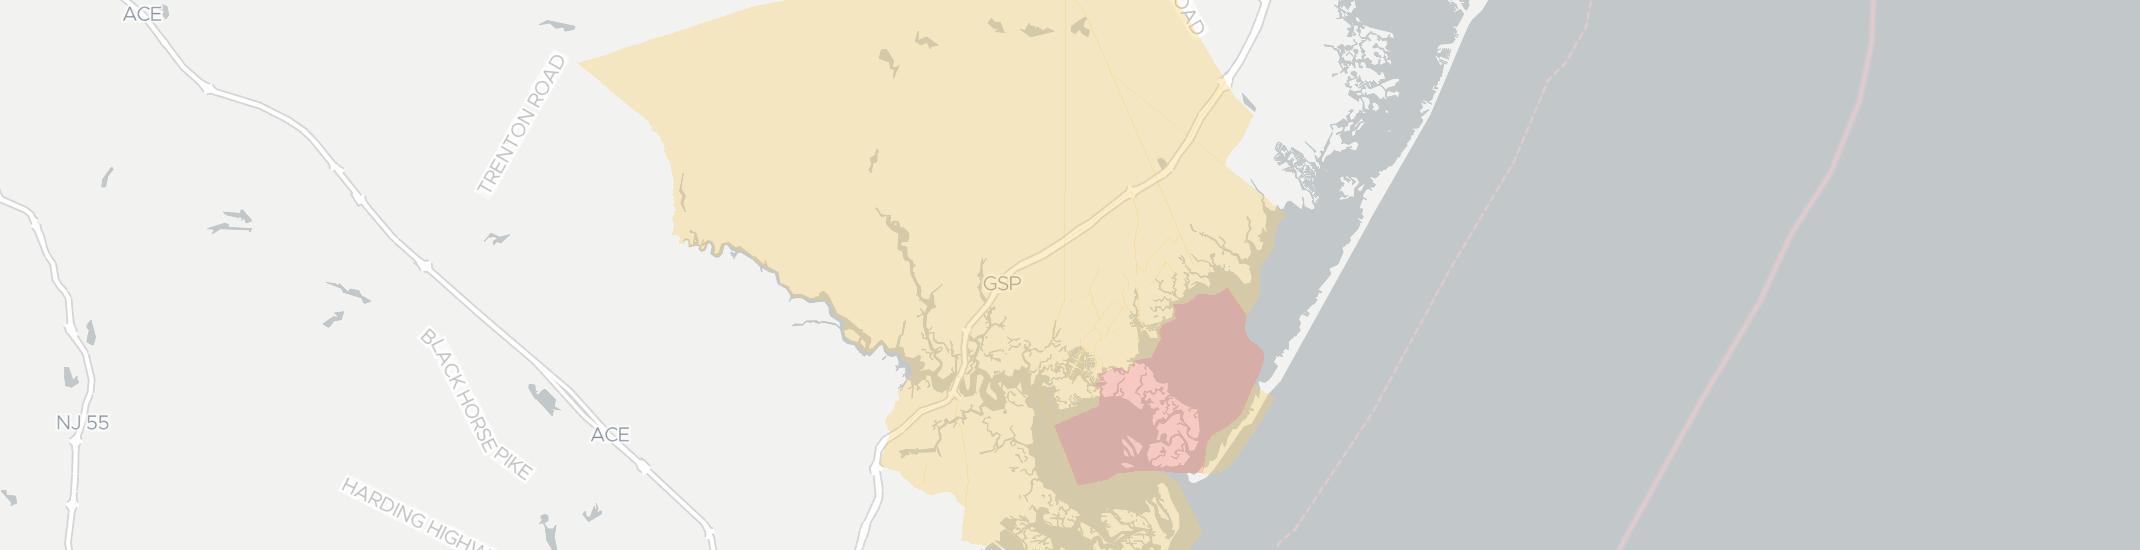 Tuckerton Internet Competition Map. Click for interactive map.